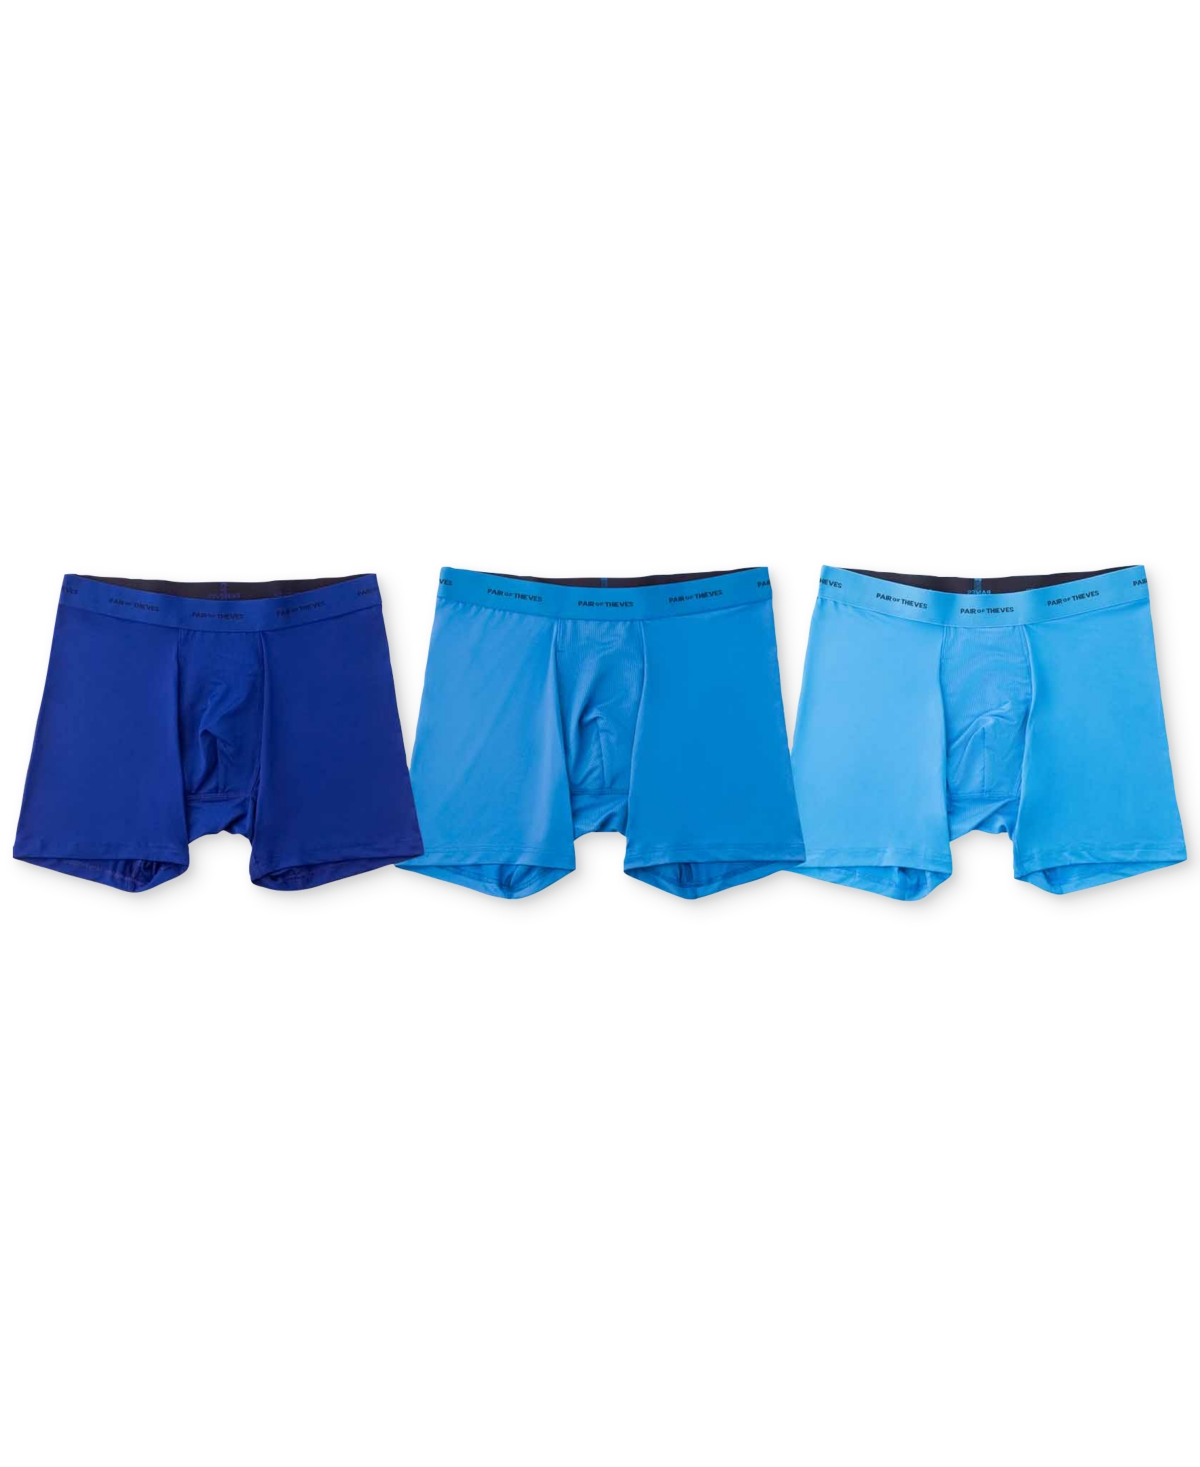 Pair Of Thieves Men's Quick Dry 3-pk. Action Blend 5" Boxer Briefs In Blue